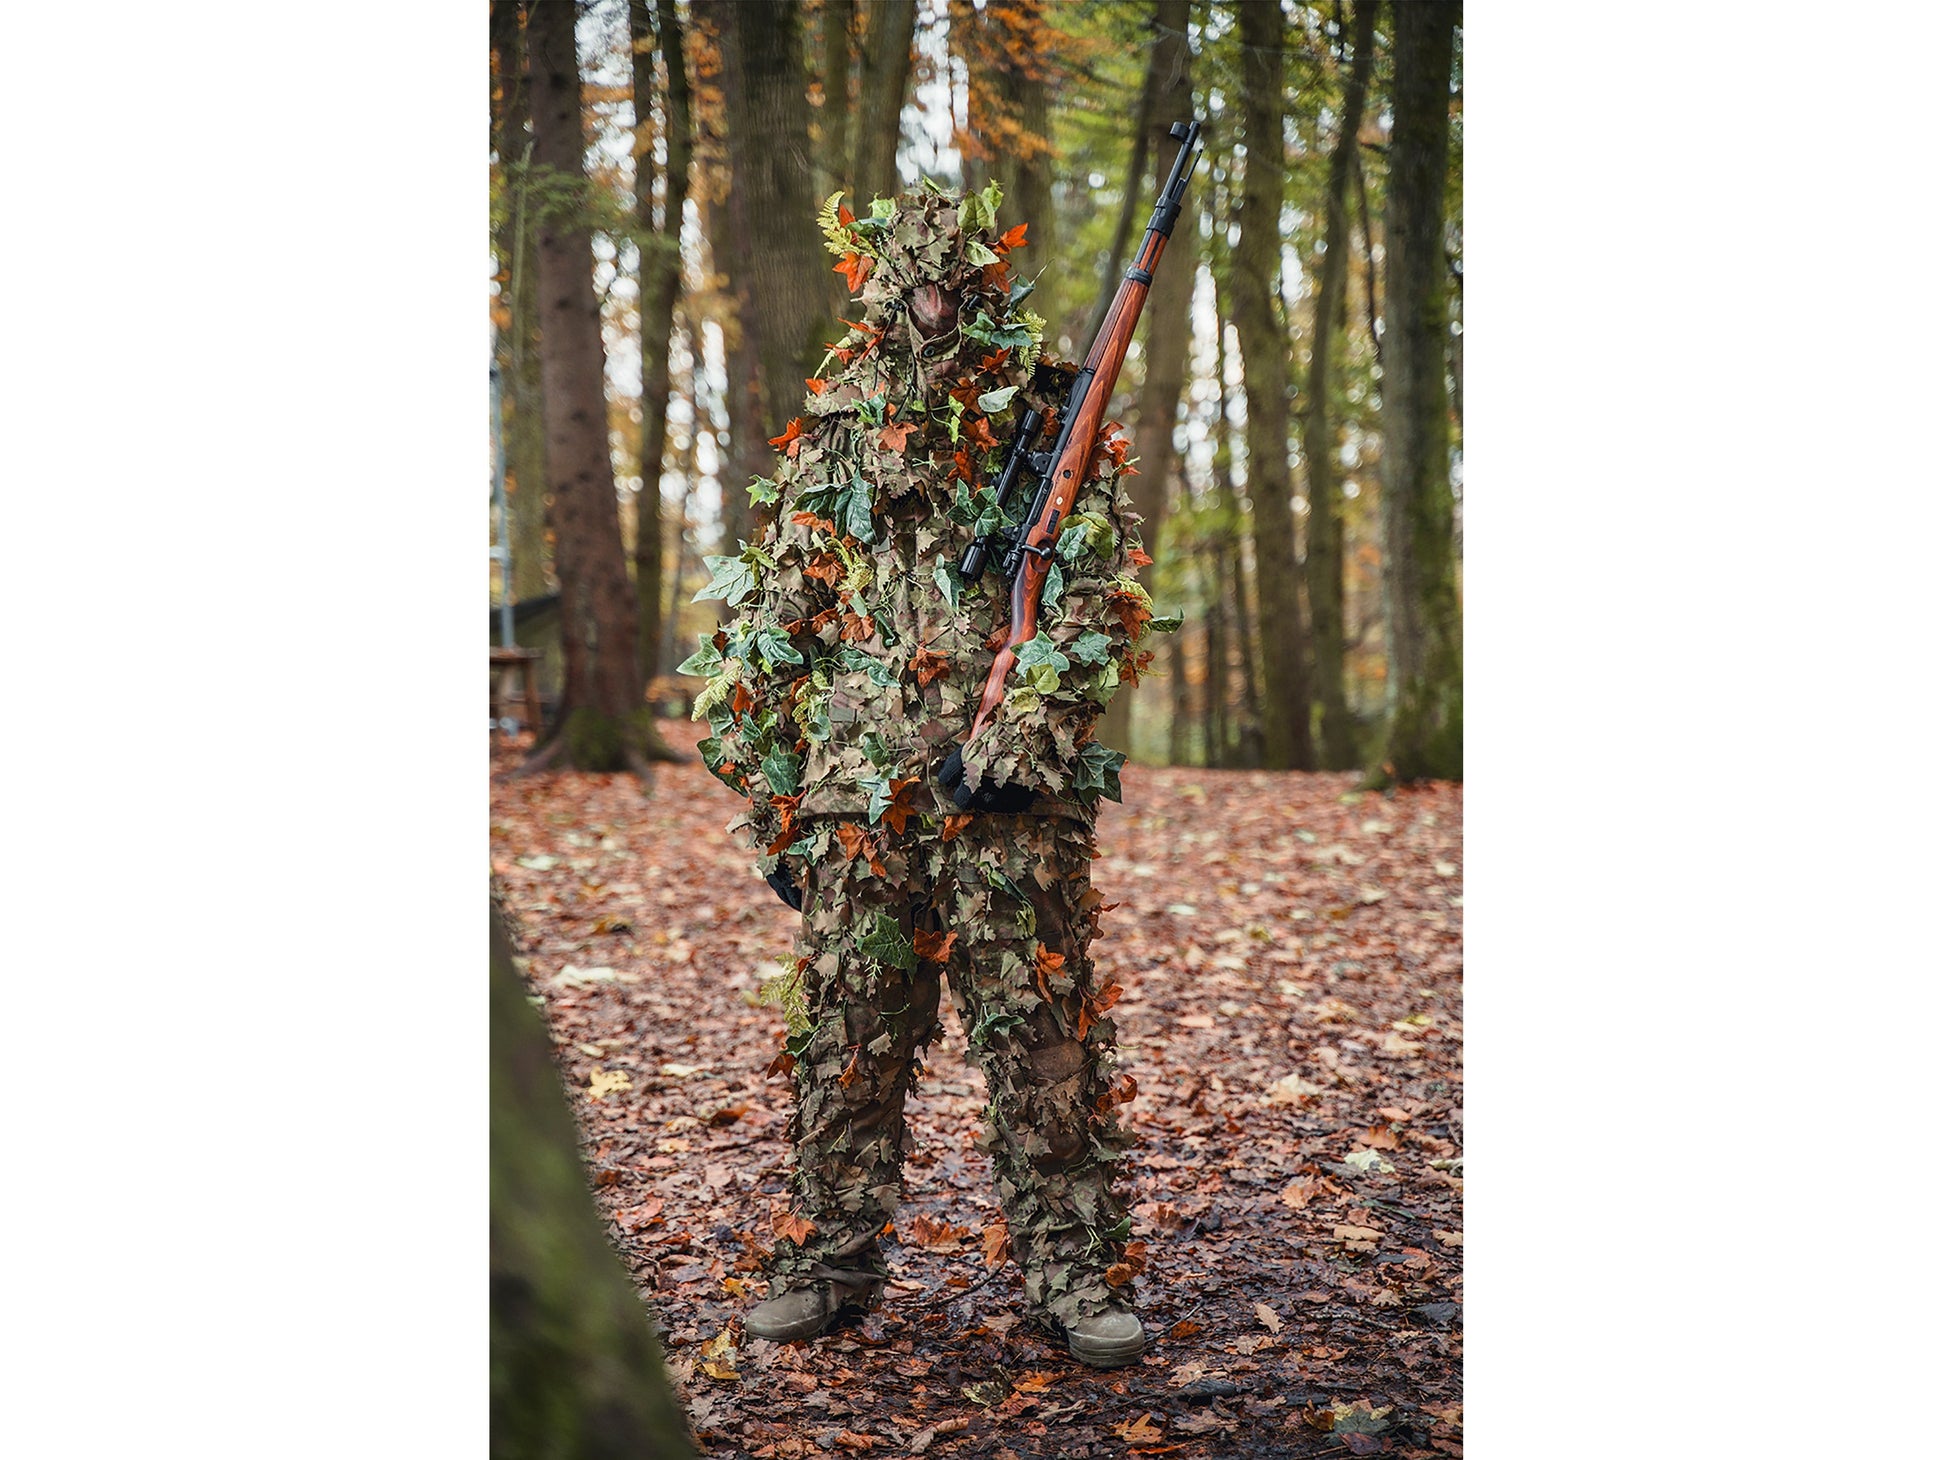 Airsoft Player in Ghillie Suit Poses with KAR98K Ares Classic Line Sniper Rifle